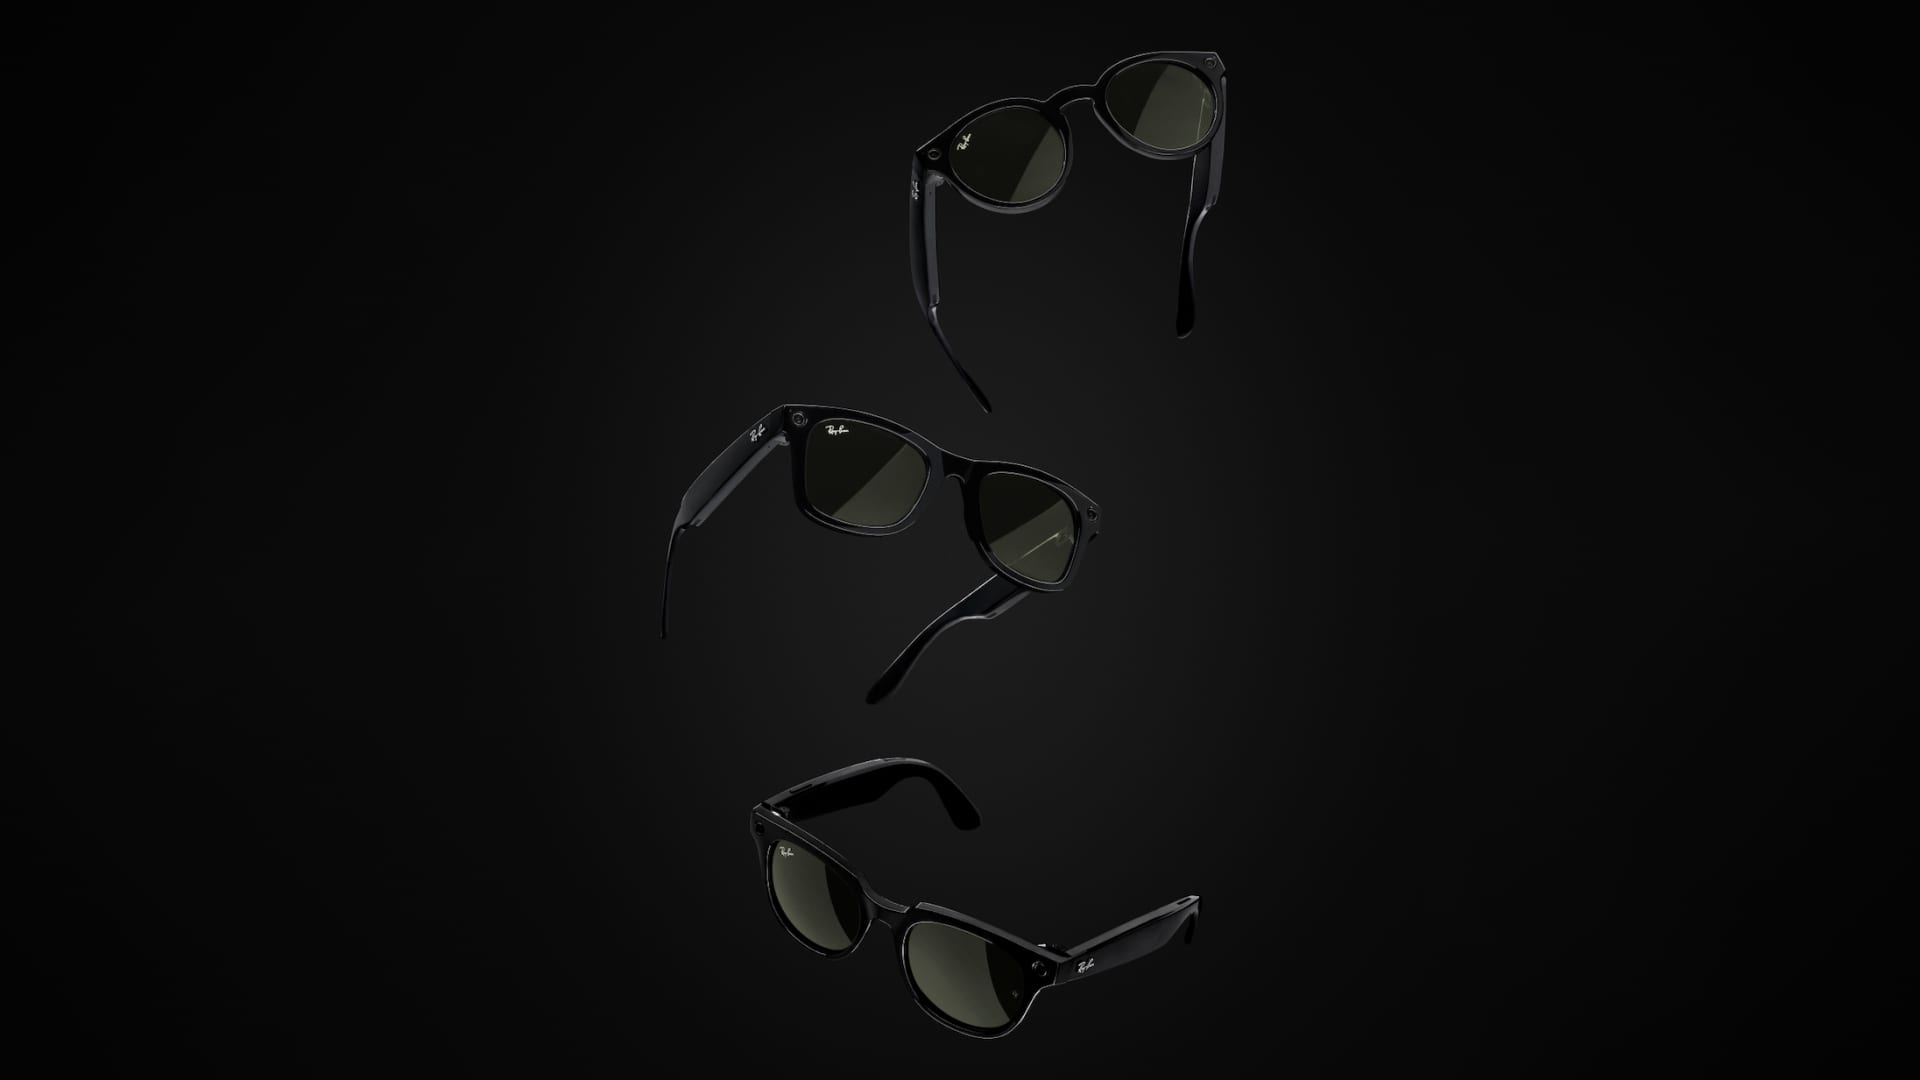 The Ray Ban Stories glasses, which start at $299, come equipped with Facebook technology that allows users to take photos and record videos with voice commands or by pressing a button on the right temple of the glasses.